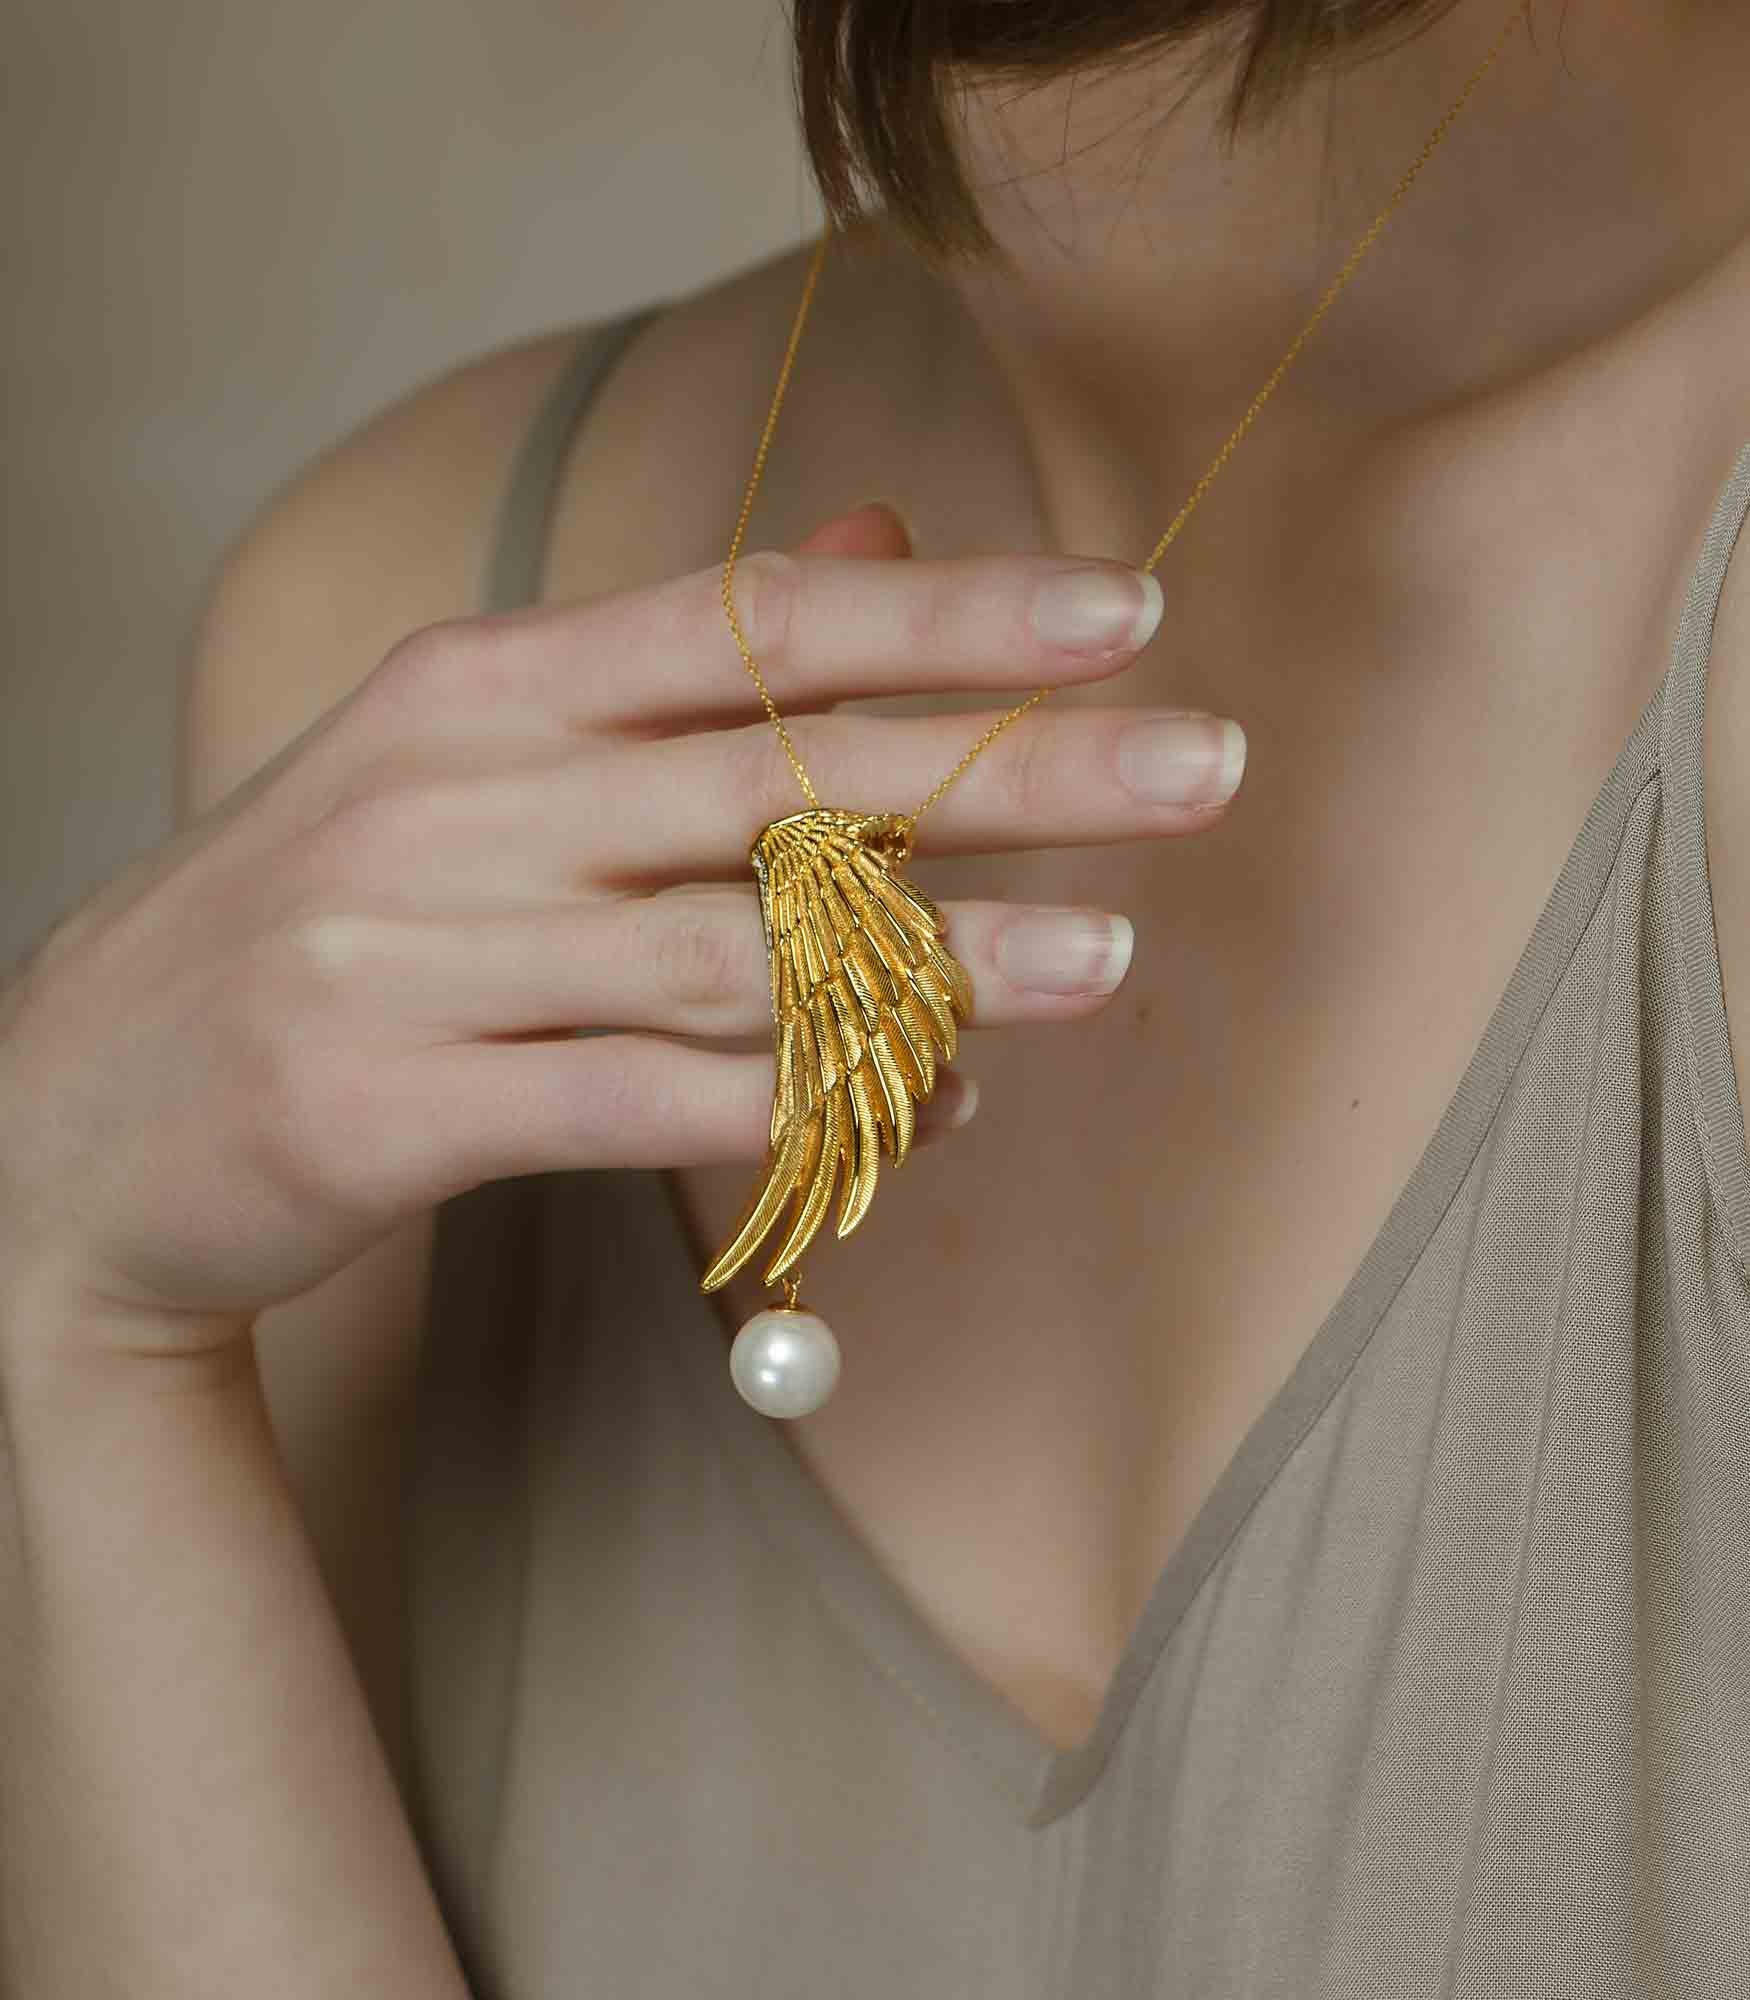 A lady holding a gold vermeil necklace which has an eagle wing pendant with a white pearl hanging from it.